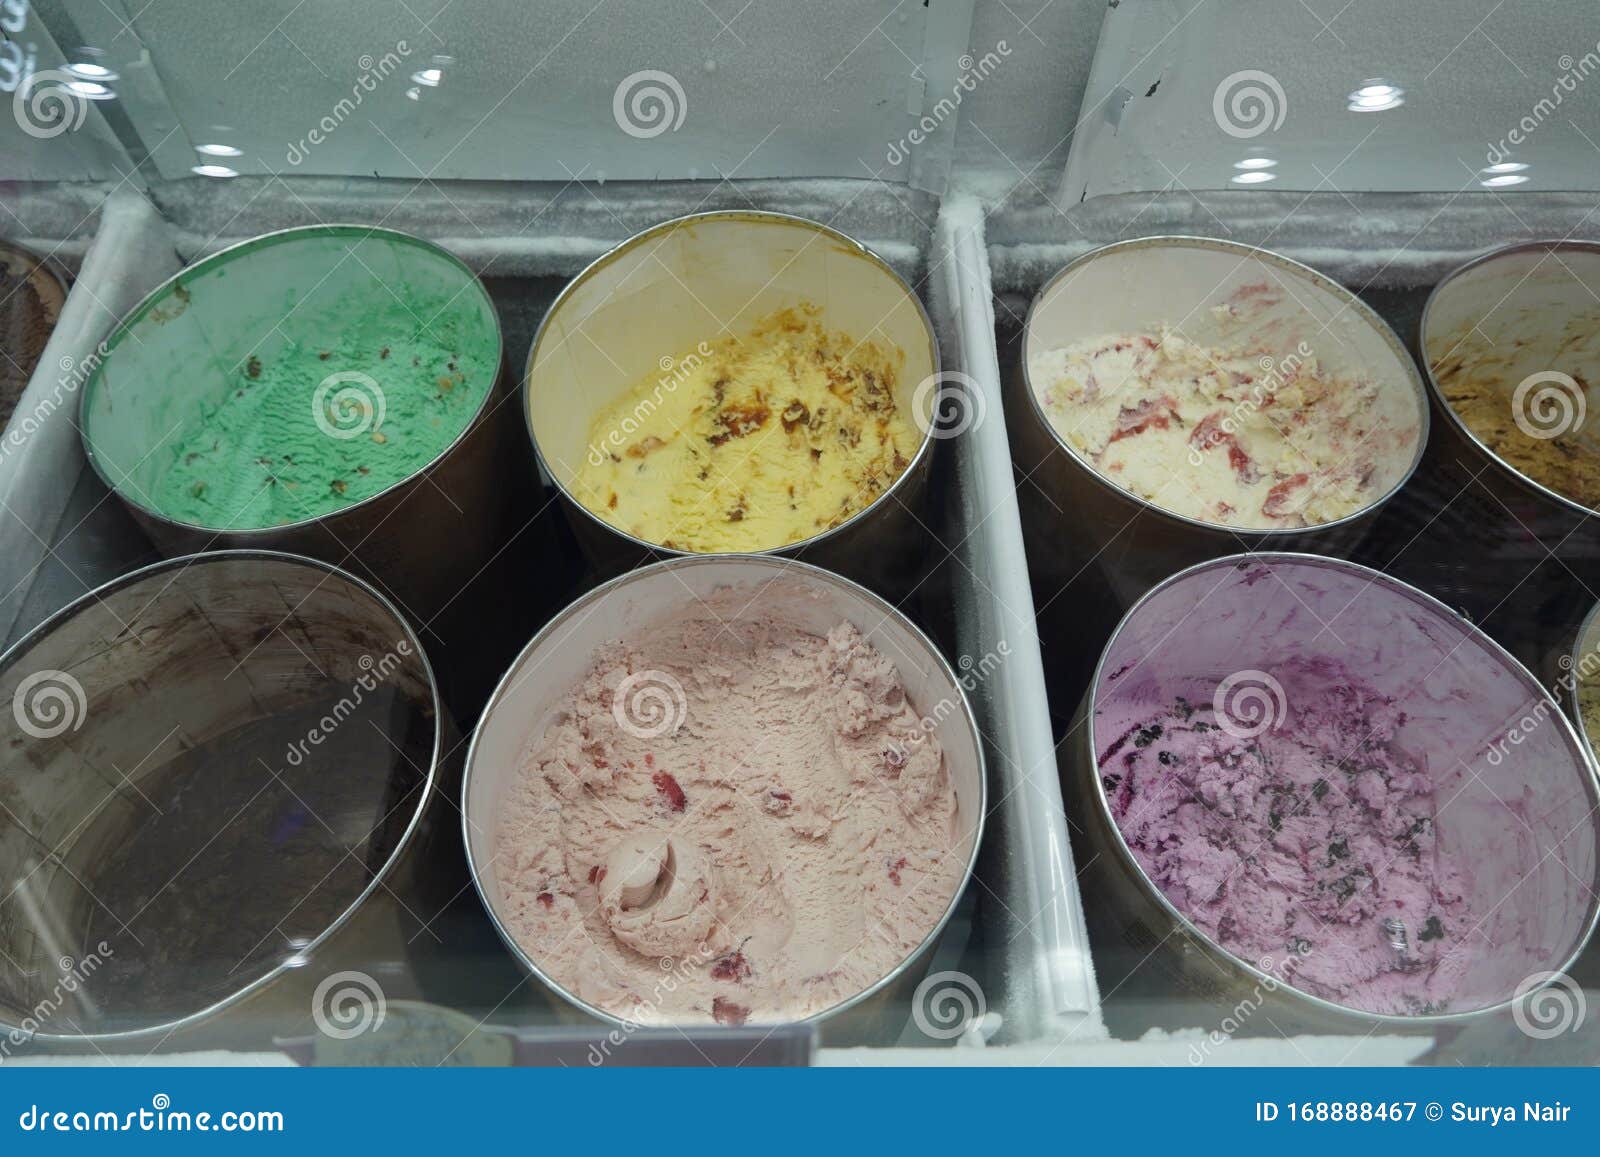 https://thumbs.dreamstime.com/z/bulk-ice-cream-kept-large-round-containers-behind-glass-gelato-shop-ice-cream-candy-store-pistachio-chocolate-bulk-ice-168888467.jpg